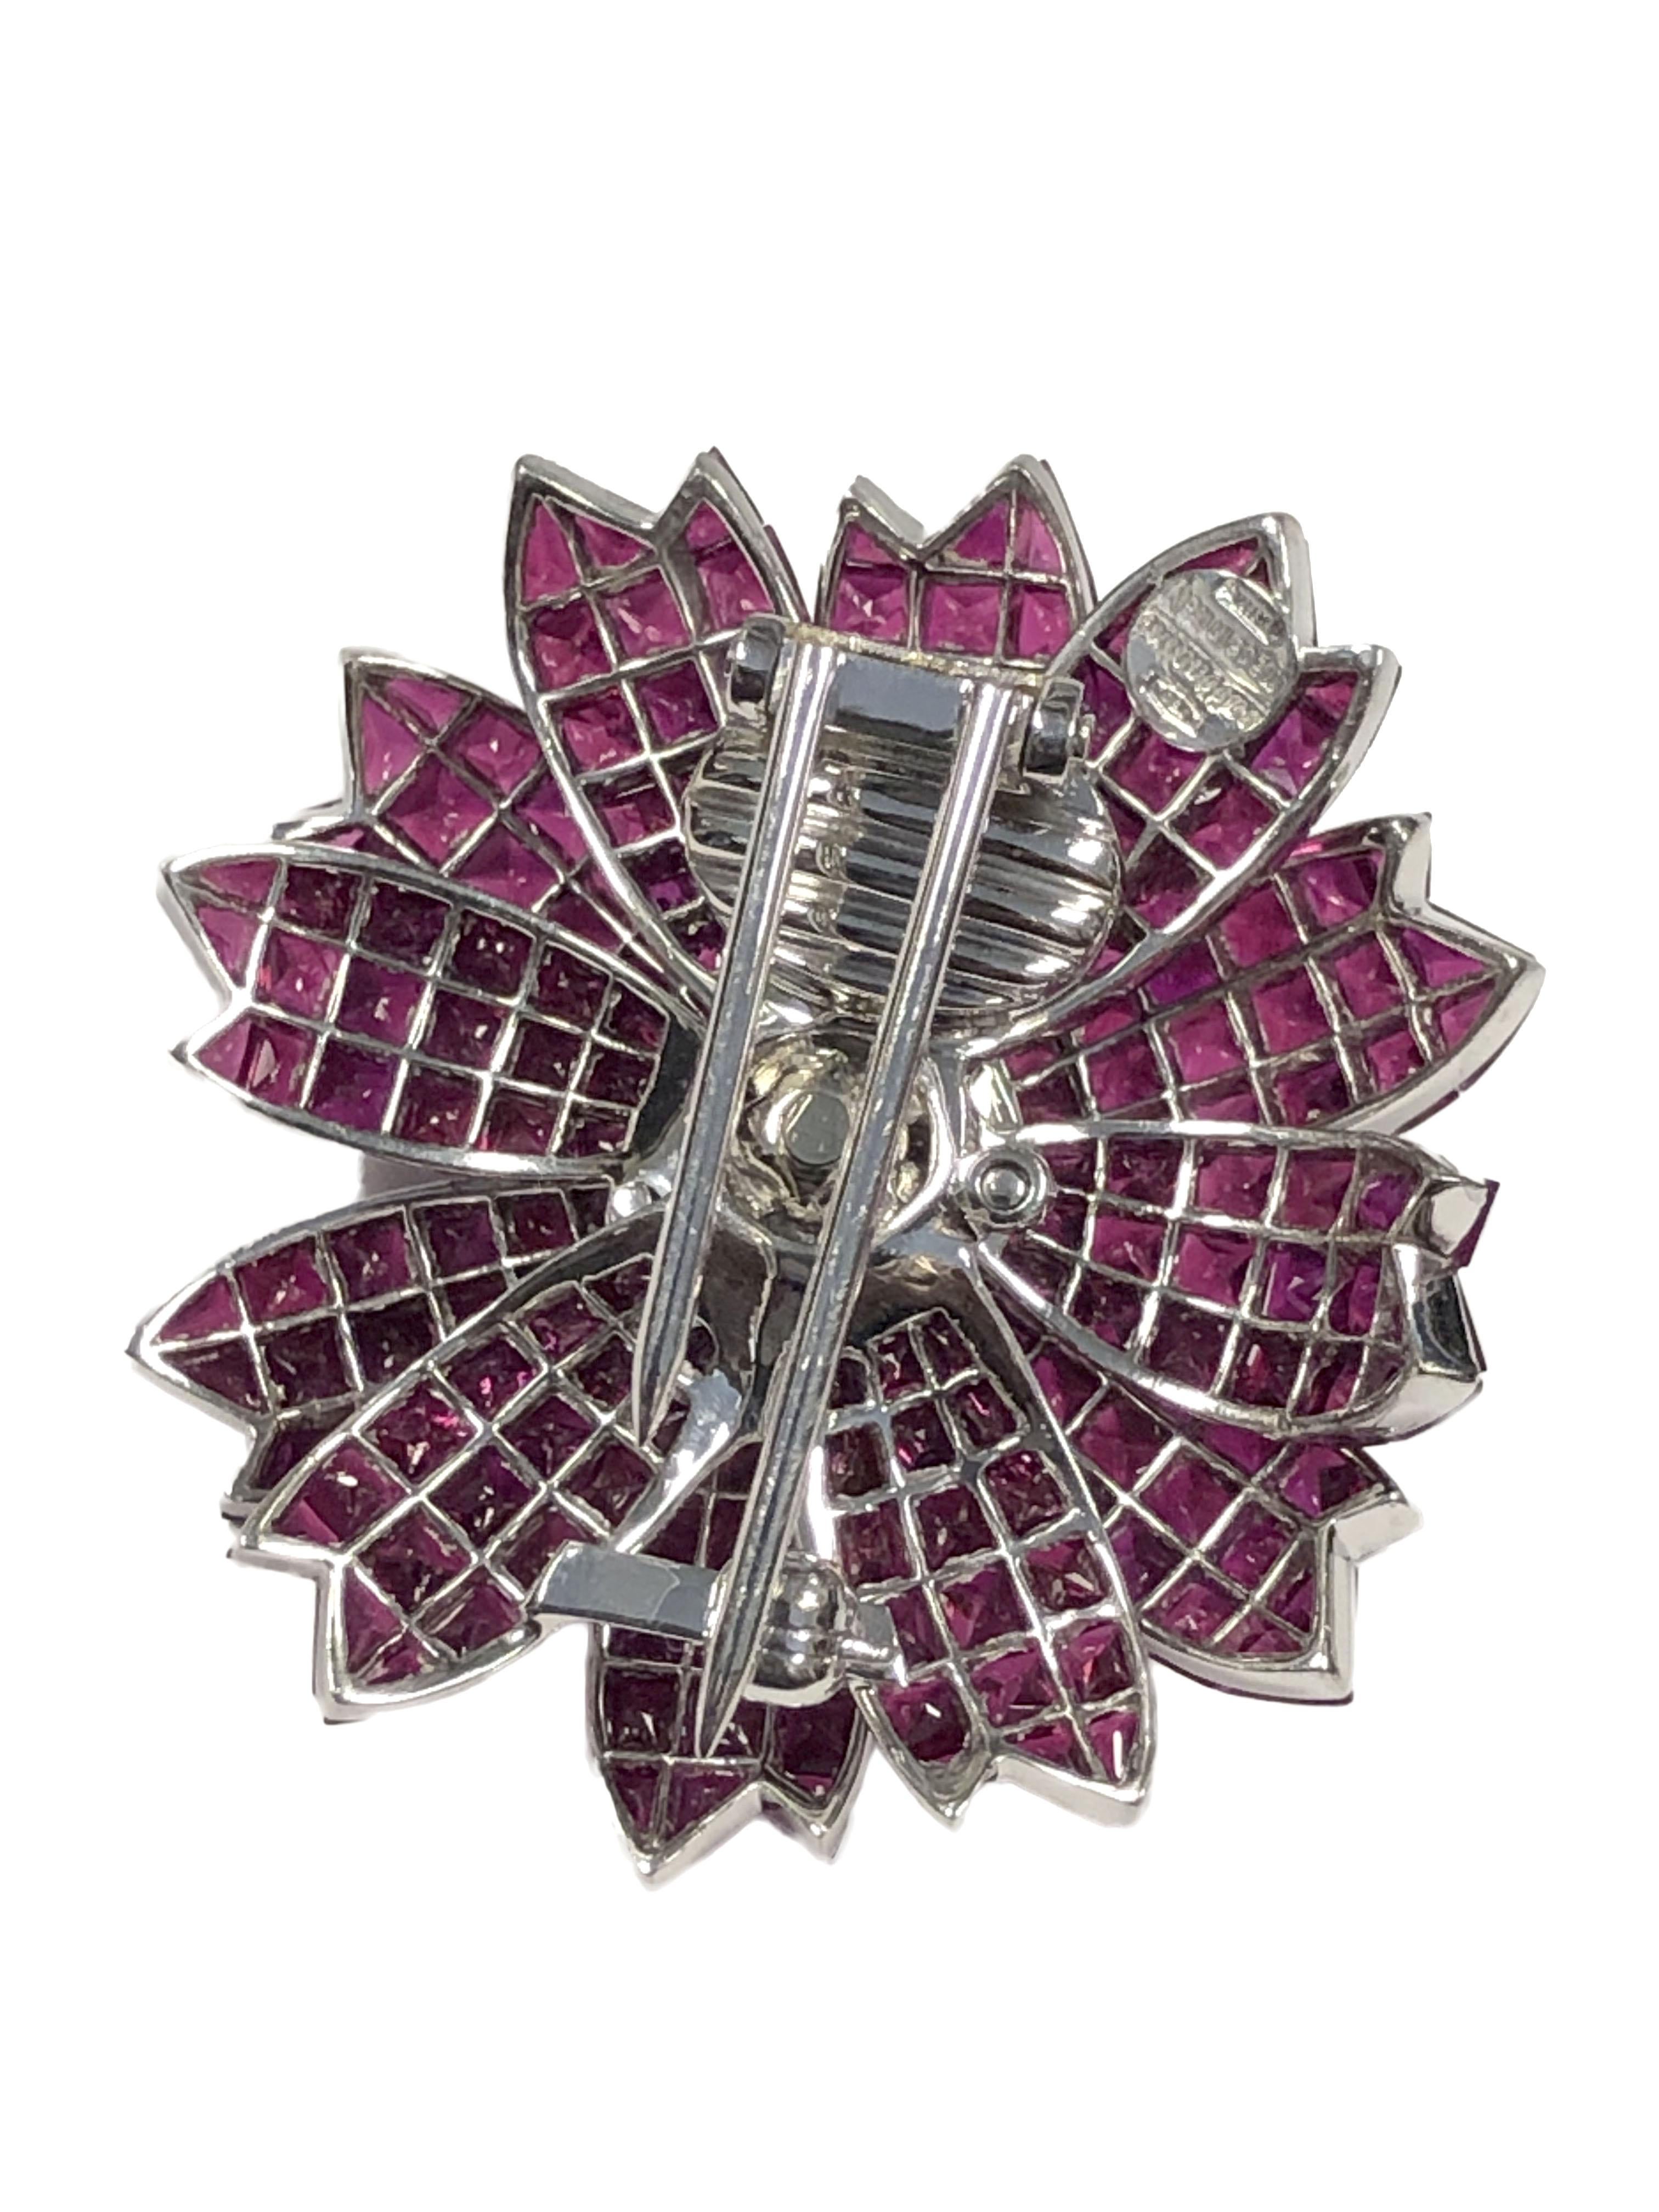 Sabbadini of Italy 18k White Gold Flower form Brooch, measuring 1 3/8 inches in diameter, Invisibly set with very Fine Bright Gem color Burma Rubies totaling approximately 30 Carats and further set with Round Brilliant cut Diamonds totaling 1.25